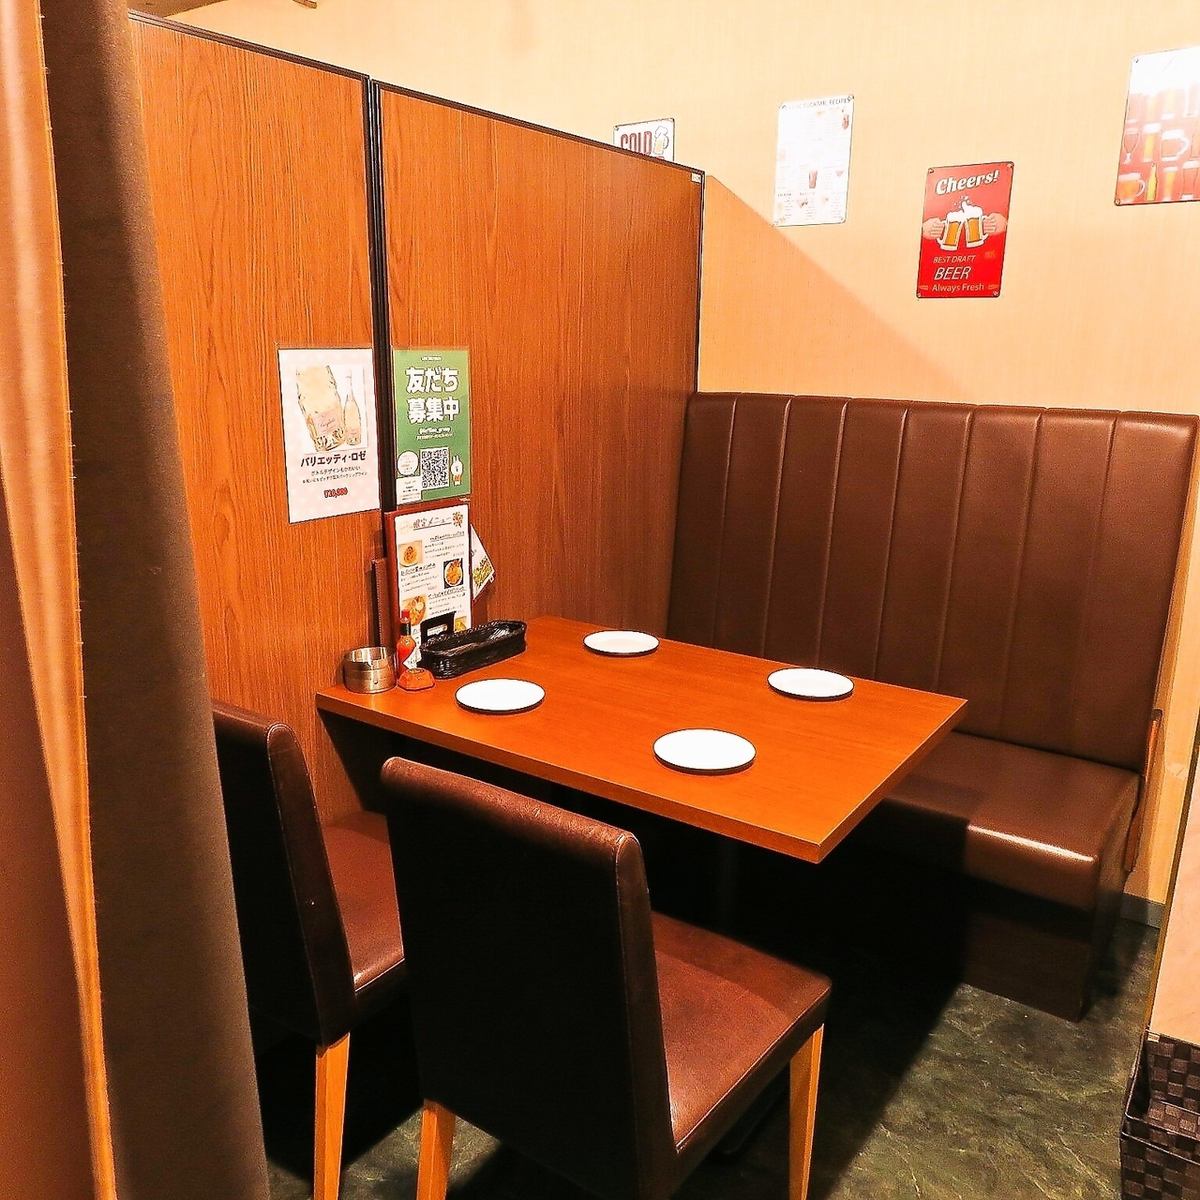 Fully equipped with private rooms that can be used by even 2 people ◎ Perfect for girls' night out or dates ♪